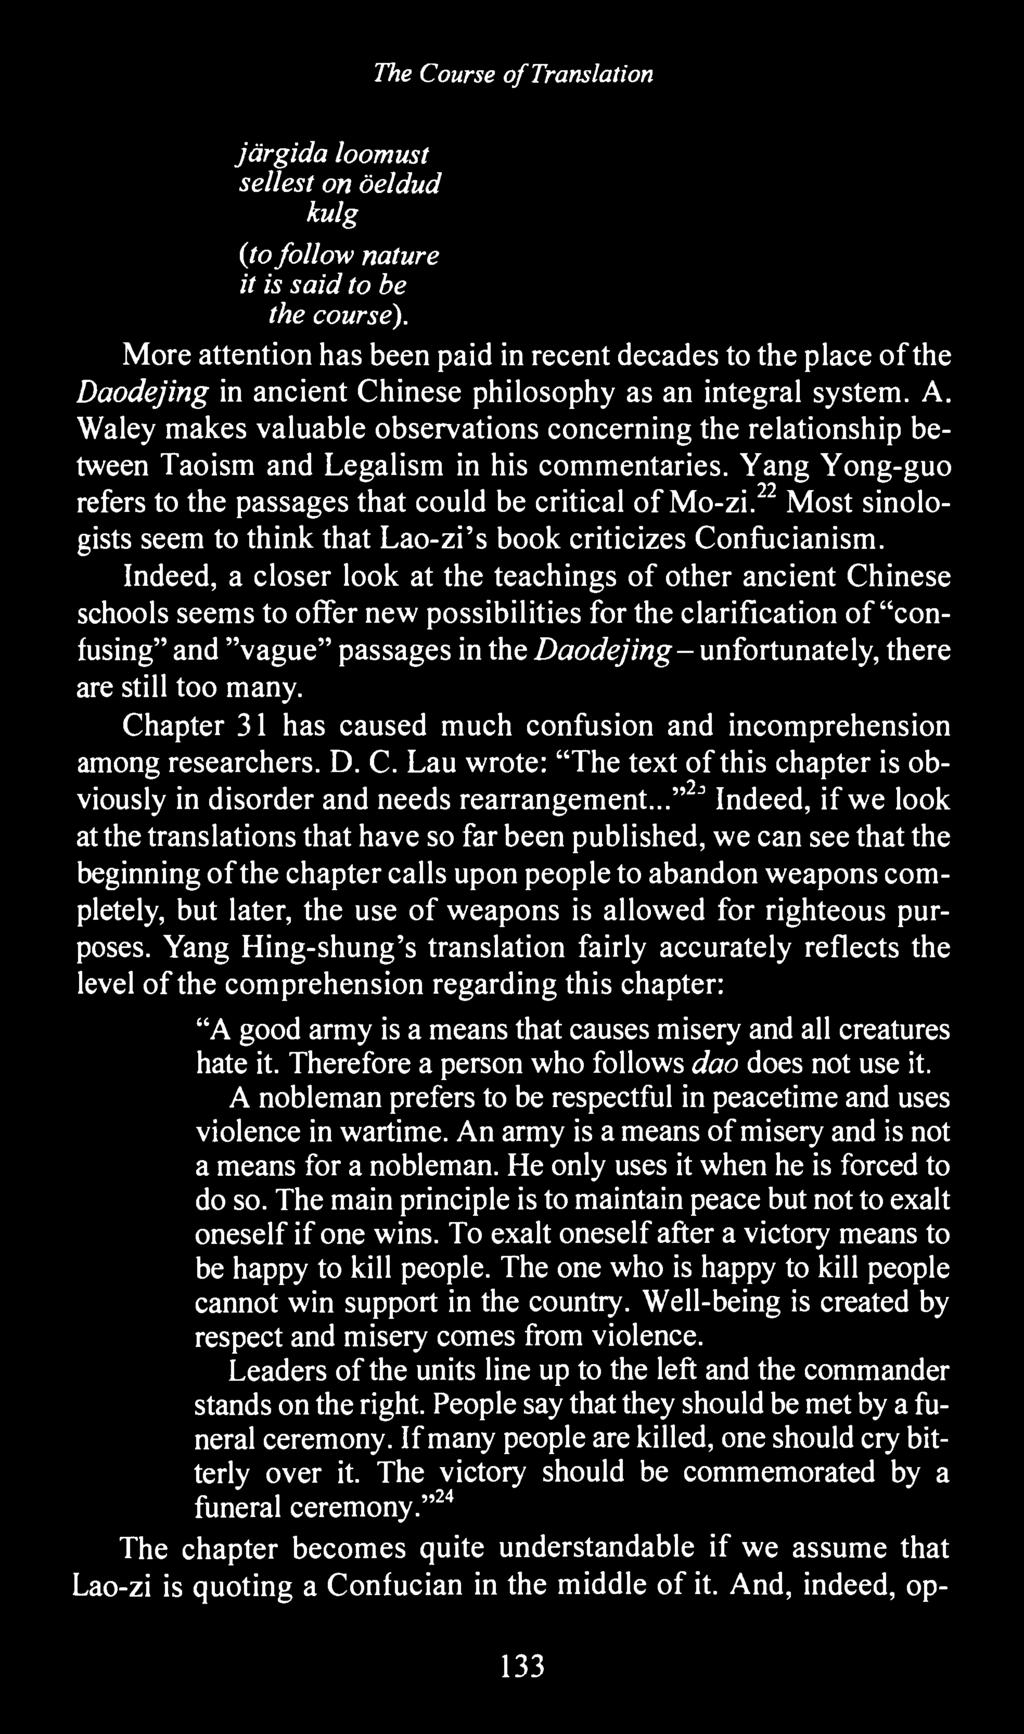 Waley makes valuable observations concerning the relationship between Taoism and Legalism in his commentaries. Yang Yong-guo refers to the passages that could be critical of Mo-zi.